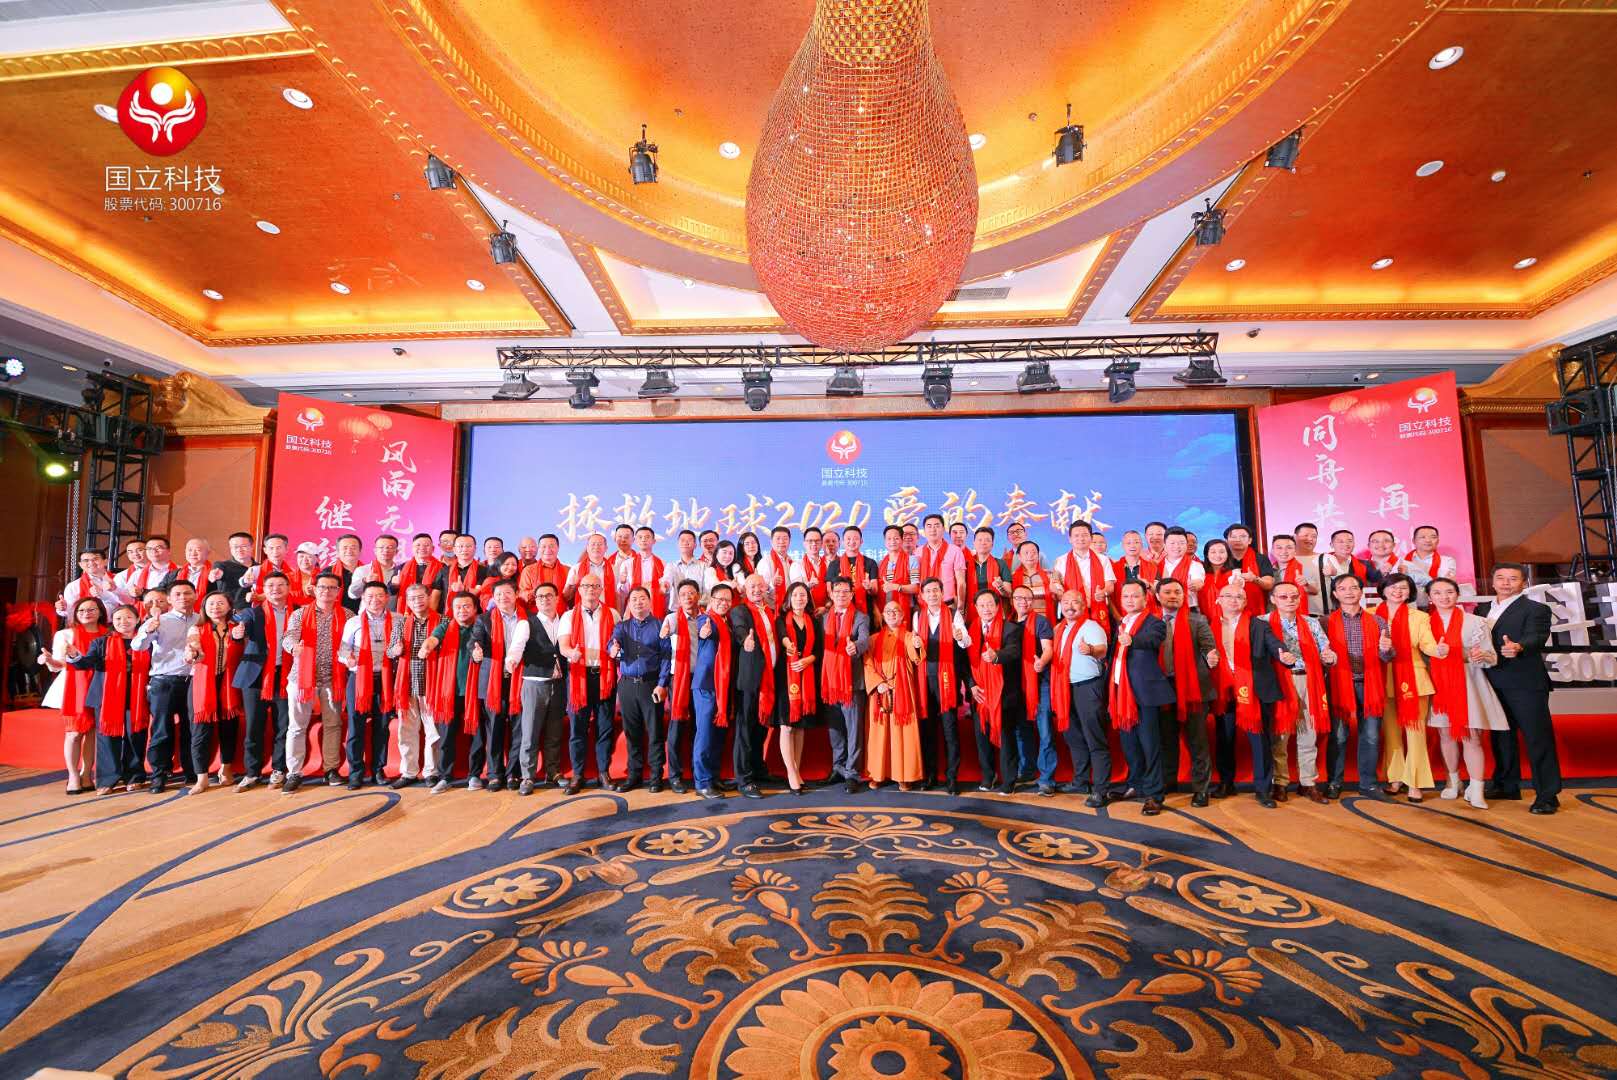 Energy saving new material Summit Forum and the third anniversary of national science and technology listing were held in Shenzhen